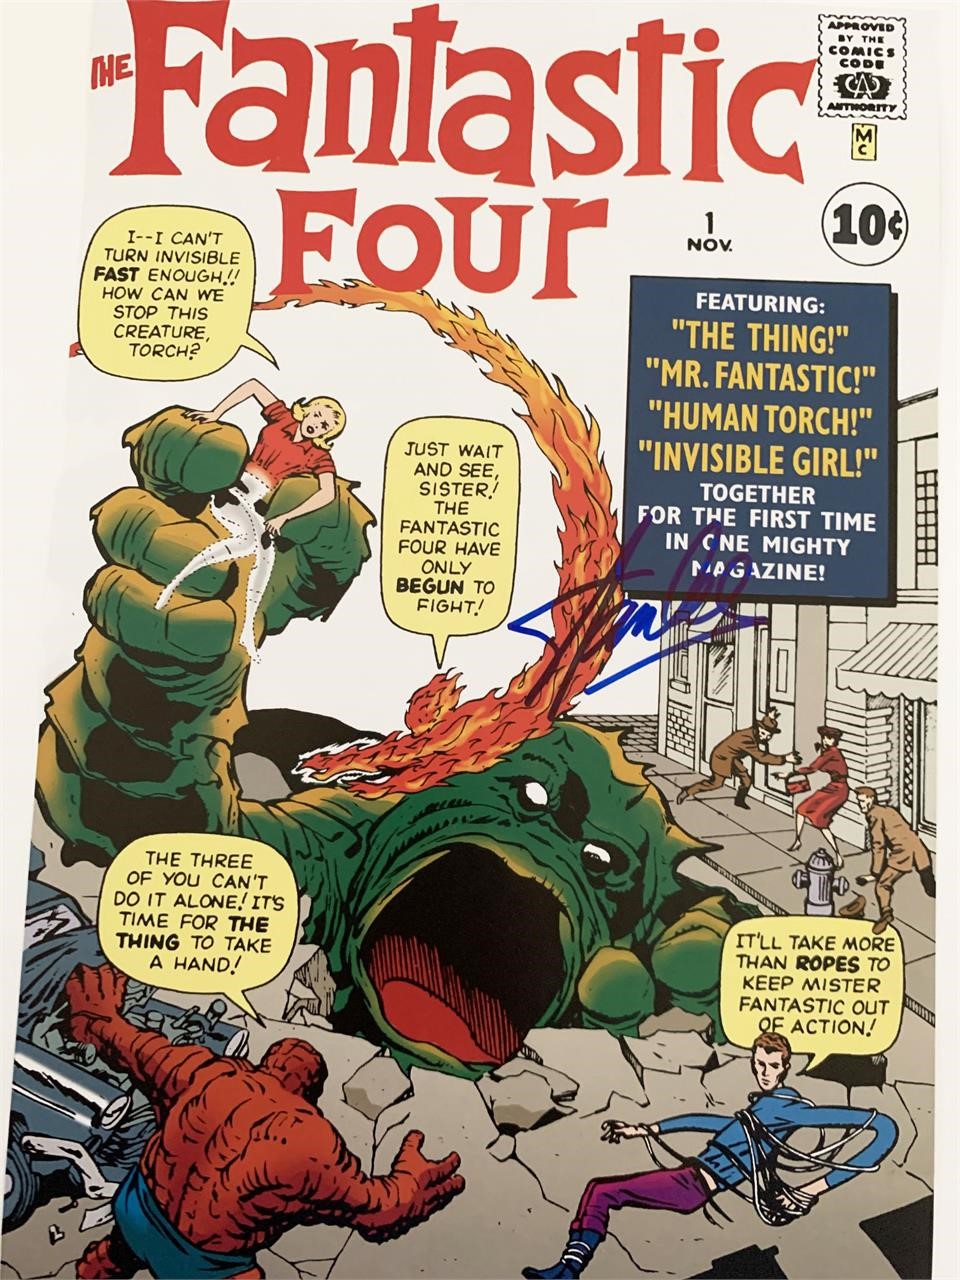 The Fantastic Four Stan Lee signed comic book cove